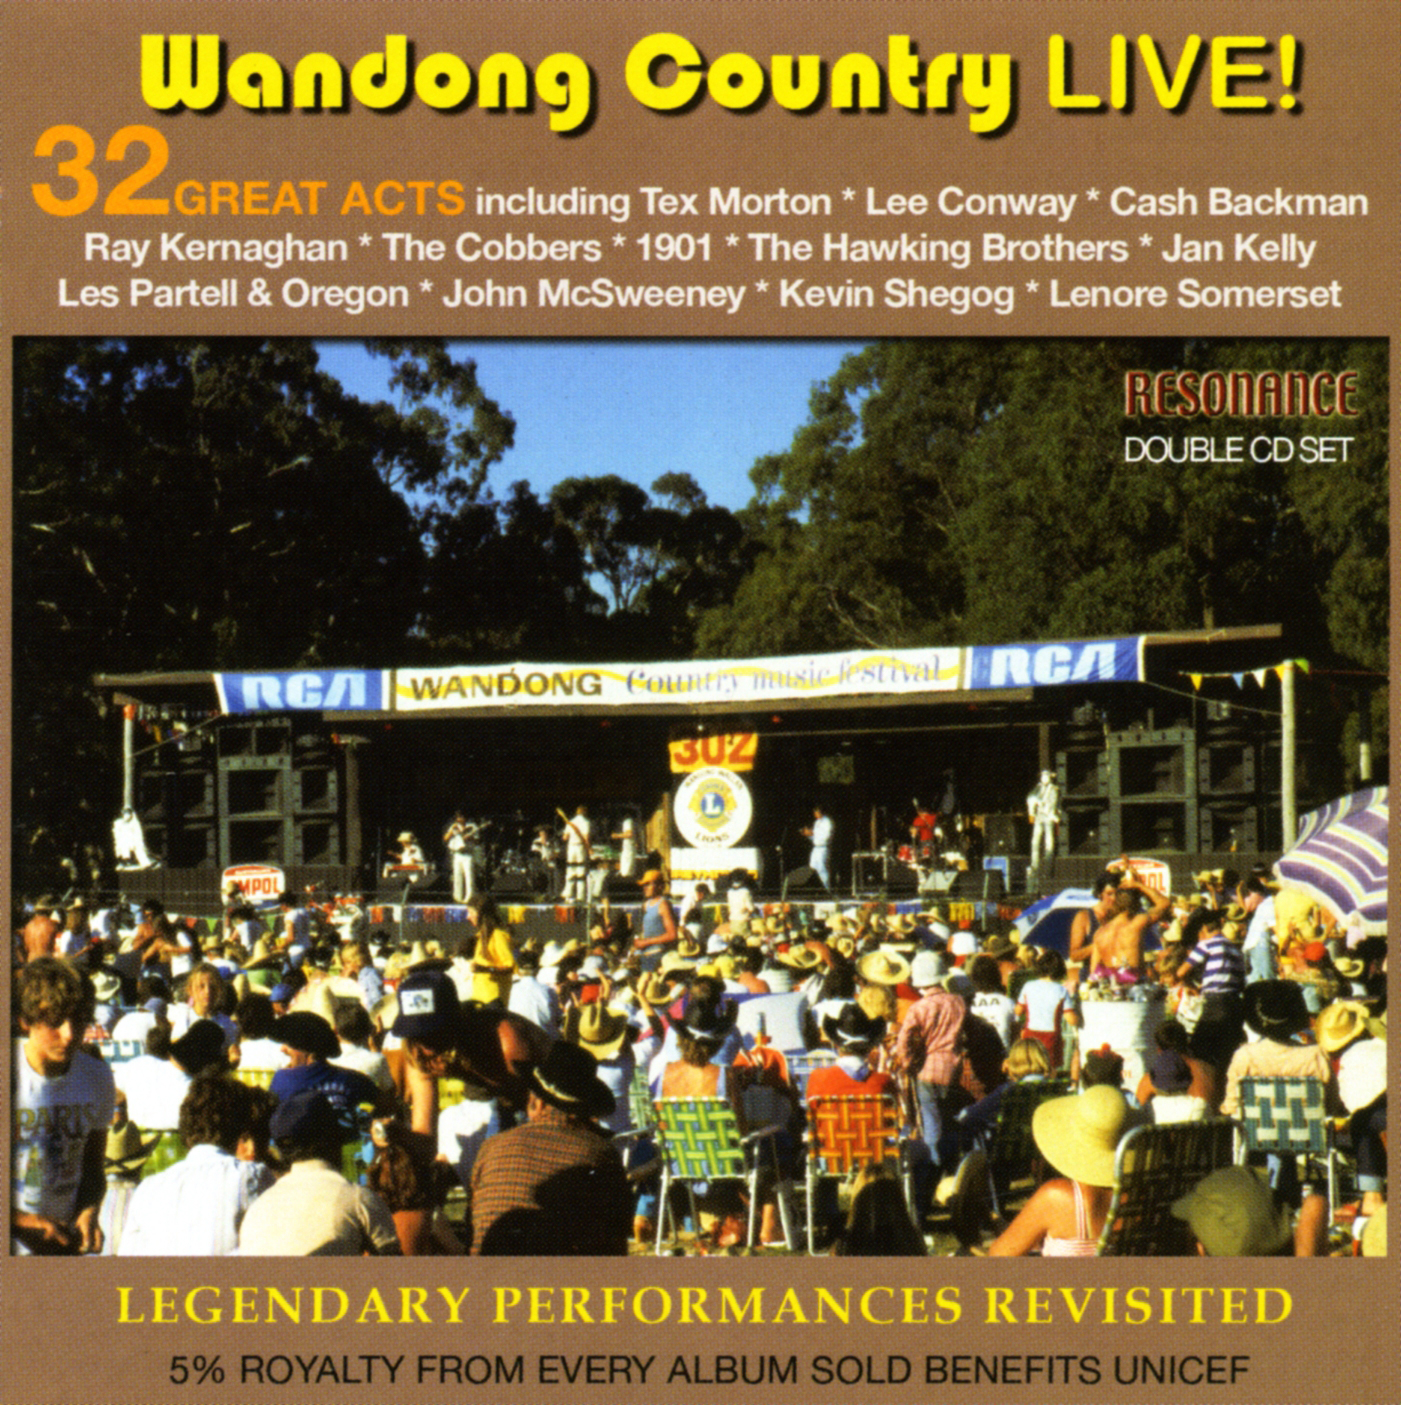 Wandong Country Live